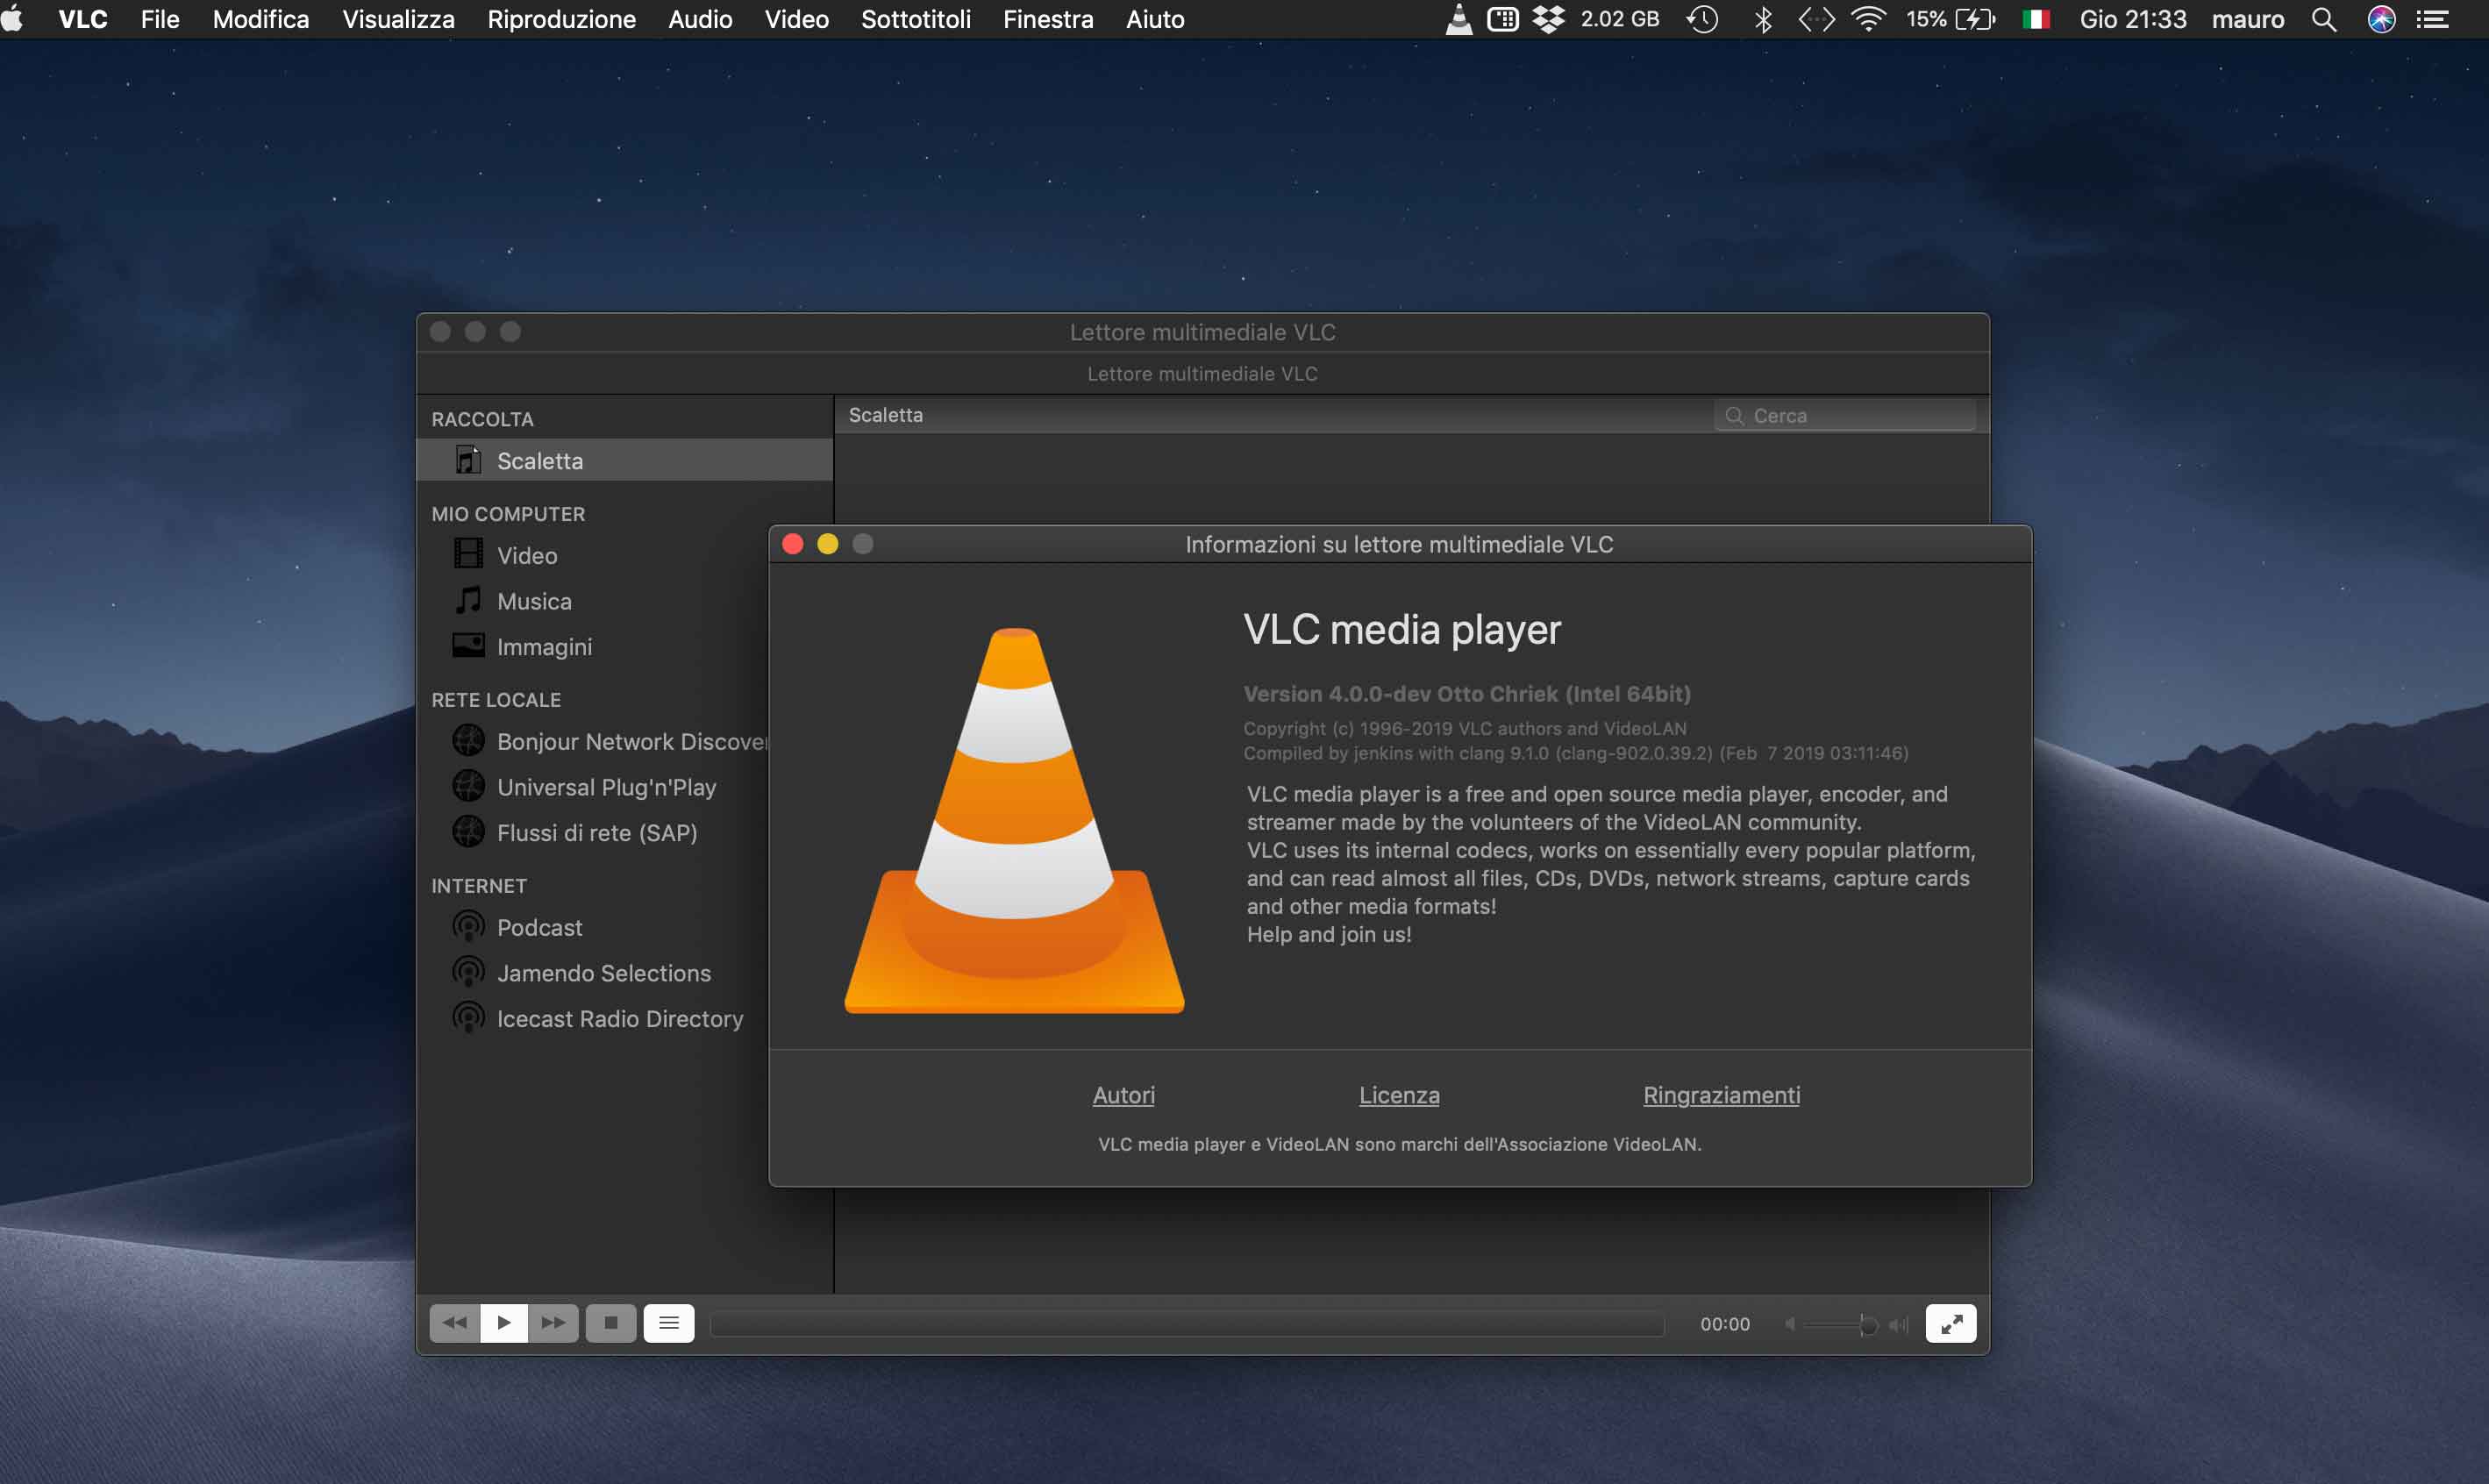 vlc player for mac